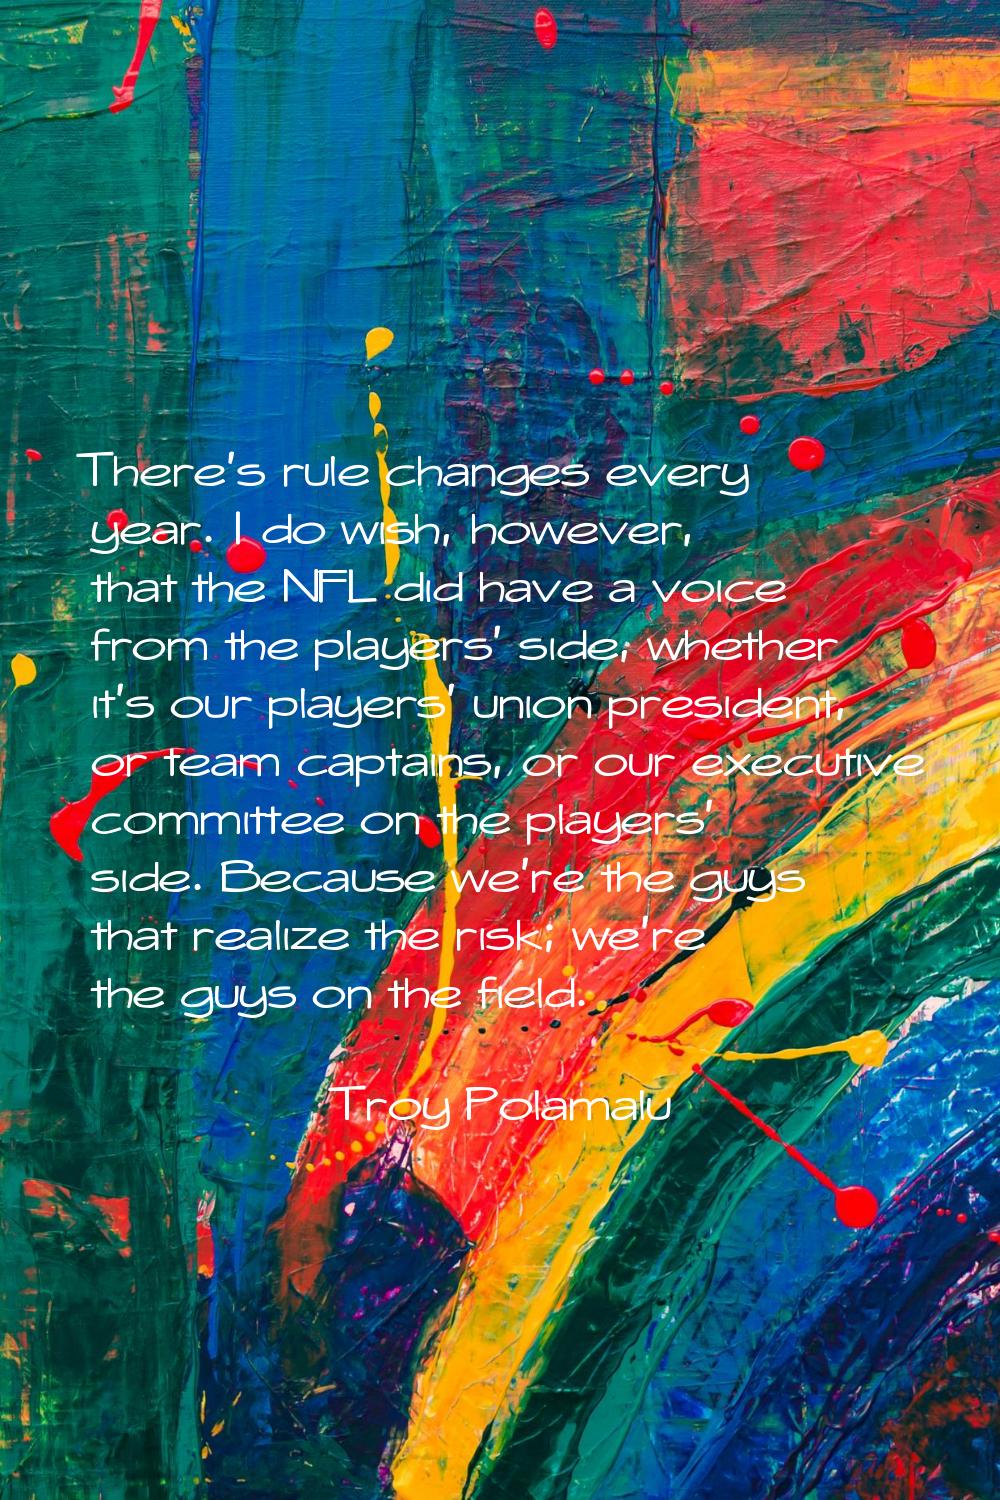 There's rule changes every year. I do wish, however, that the NFL did have a voice from the players